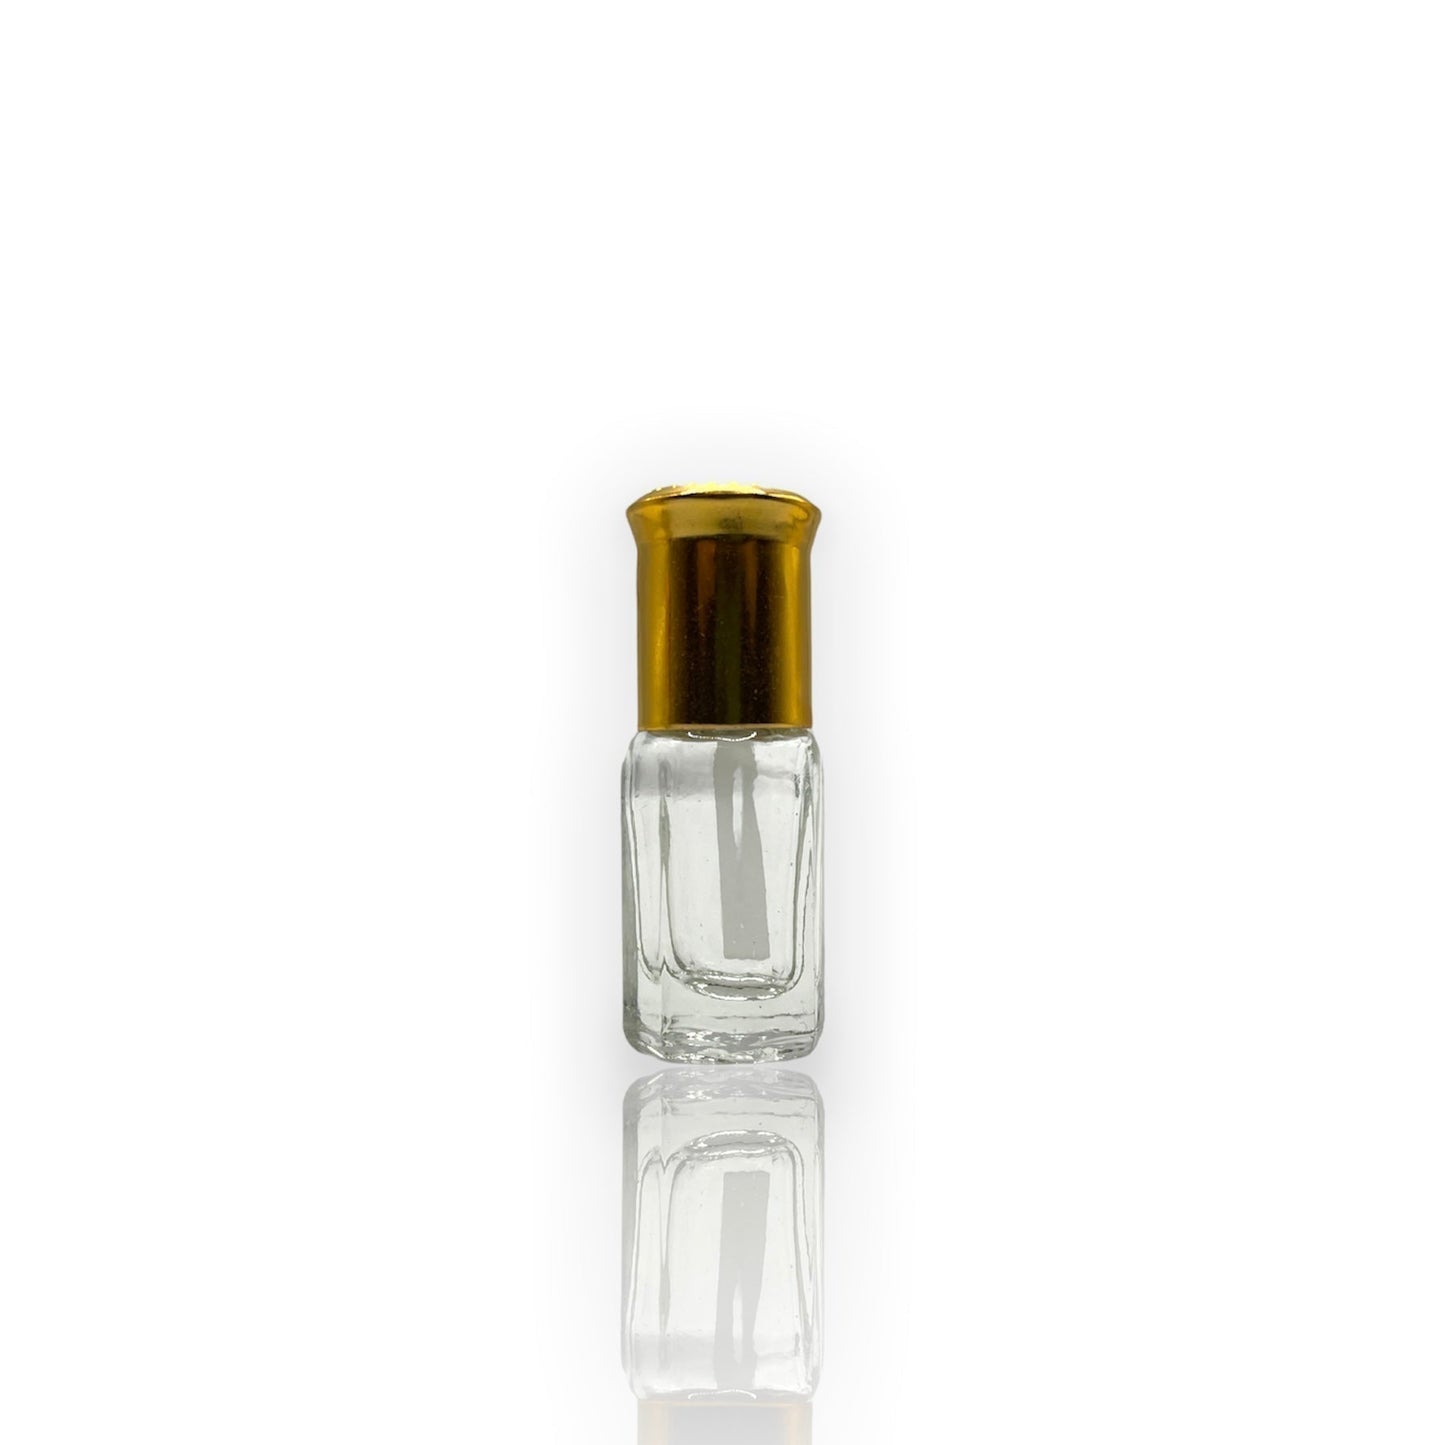 M-29 Oil Perfume *Inspired By Tom Ford Lost Cherry